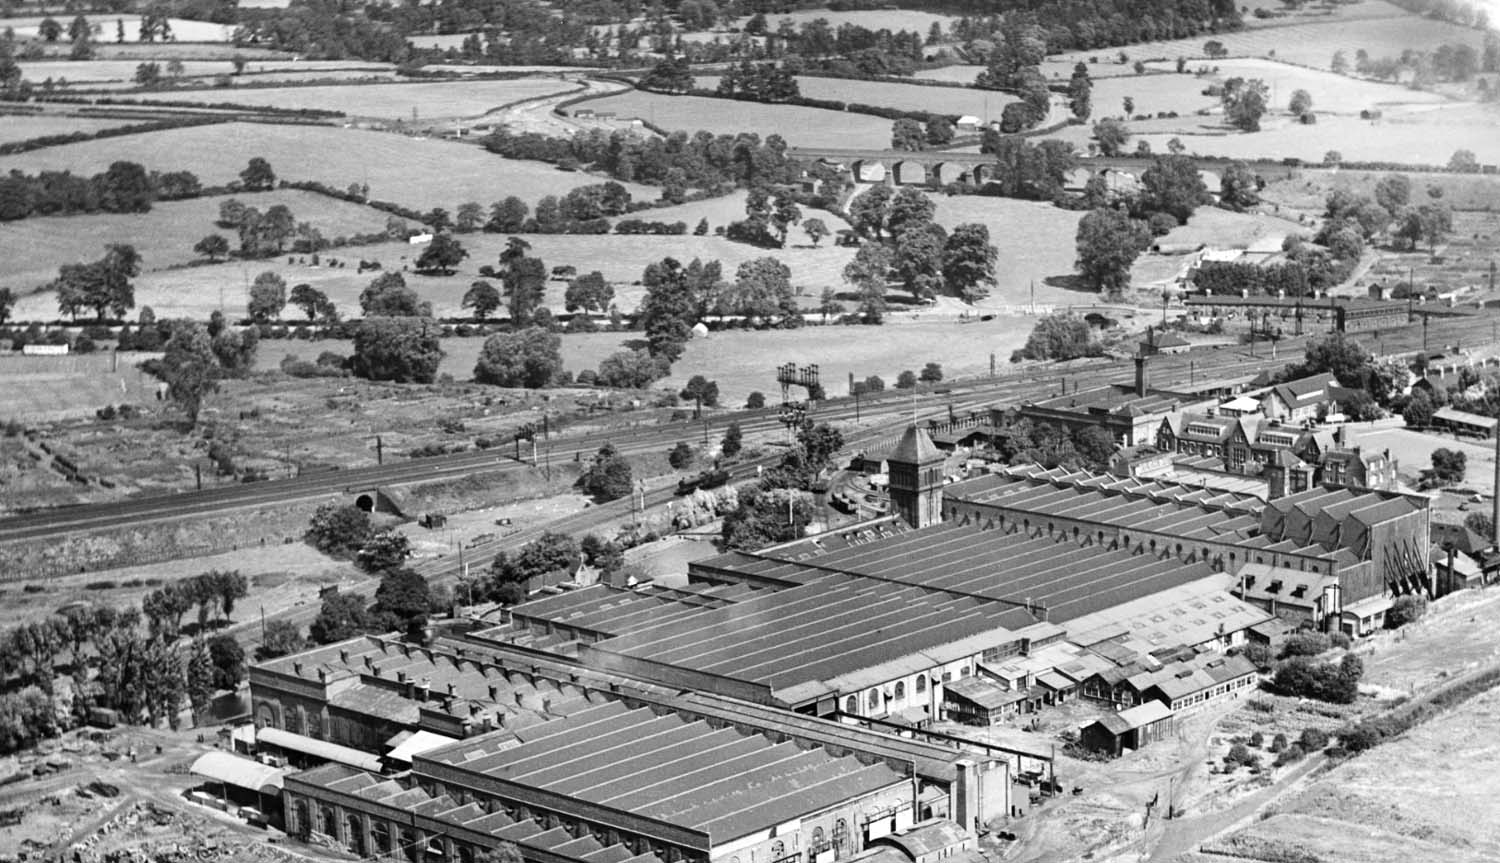 Another 1930 aerial view of the Leamington branch's junction with the Trent Valley Railway and the lines to Coventry